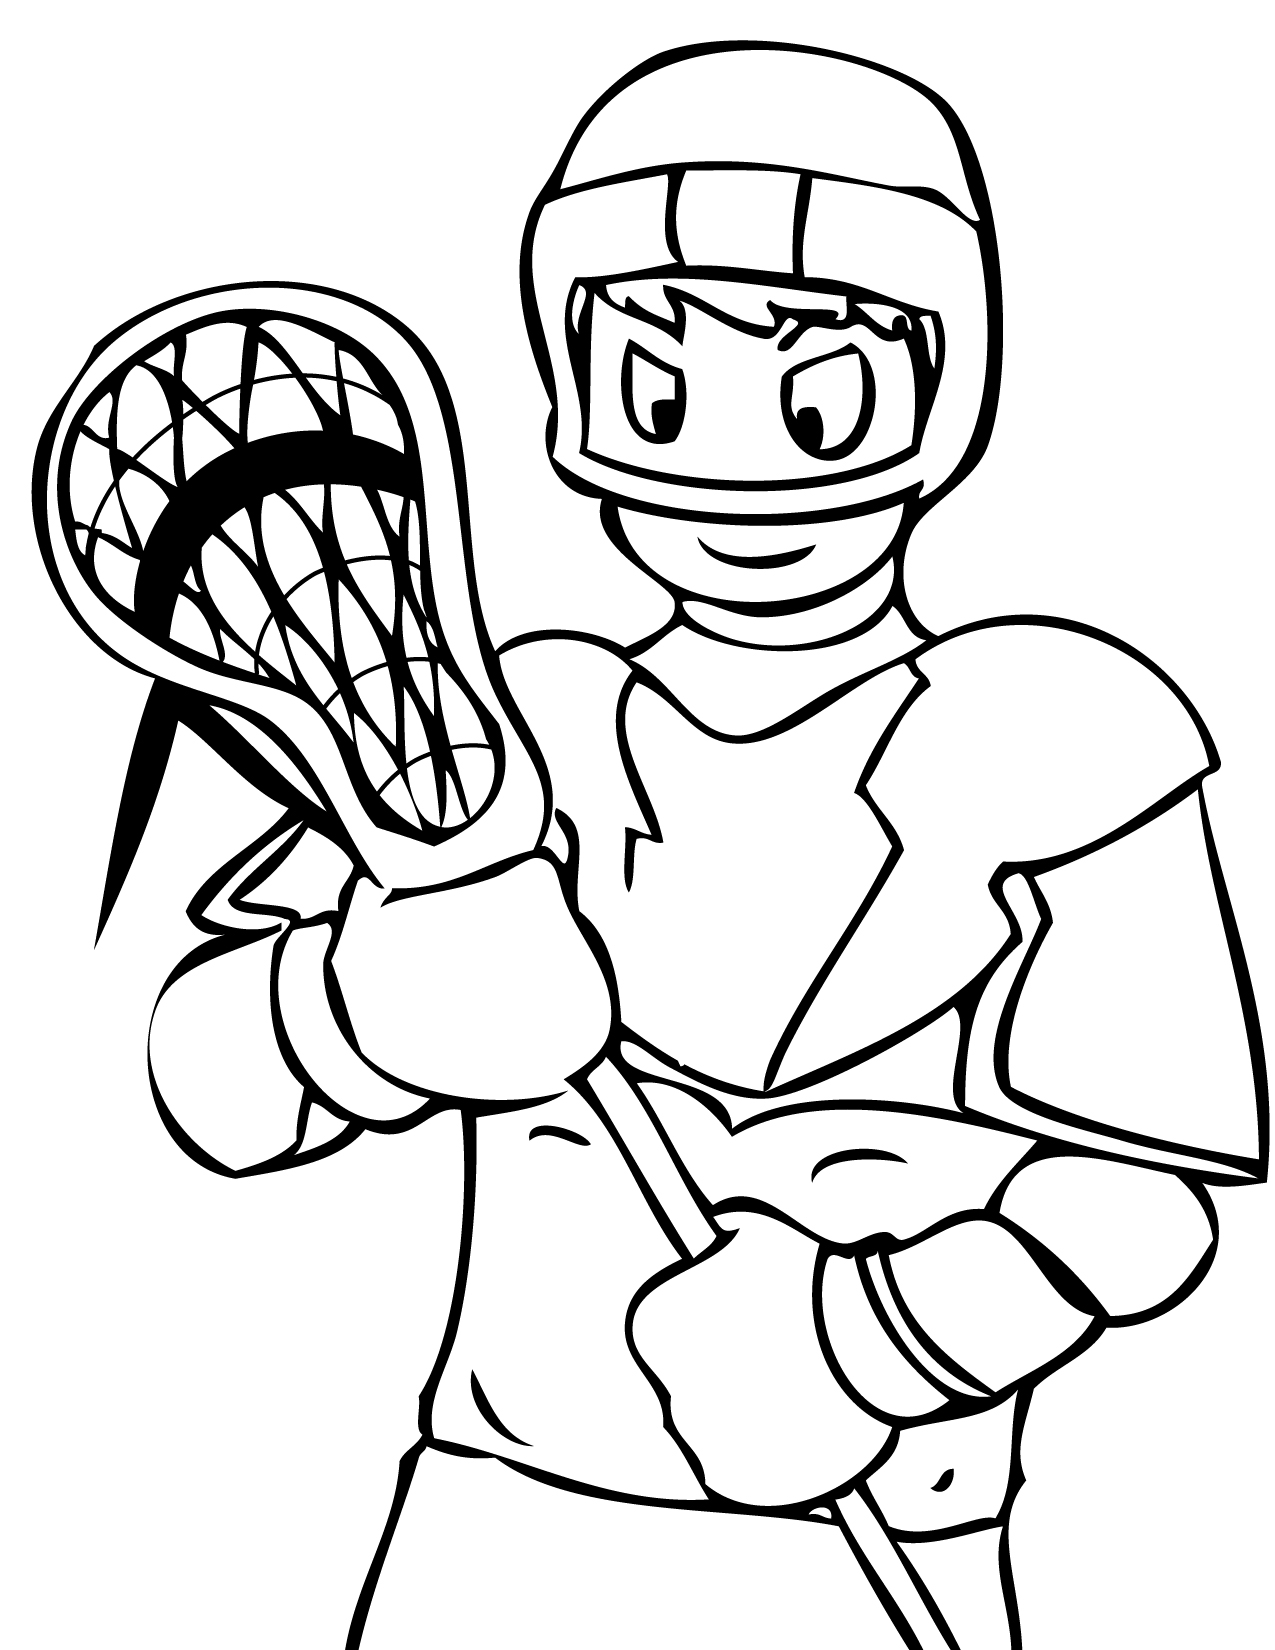 lacrosse coloring pages for kids